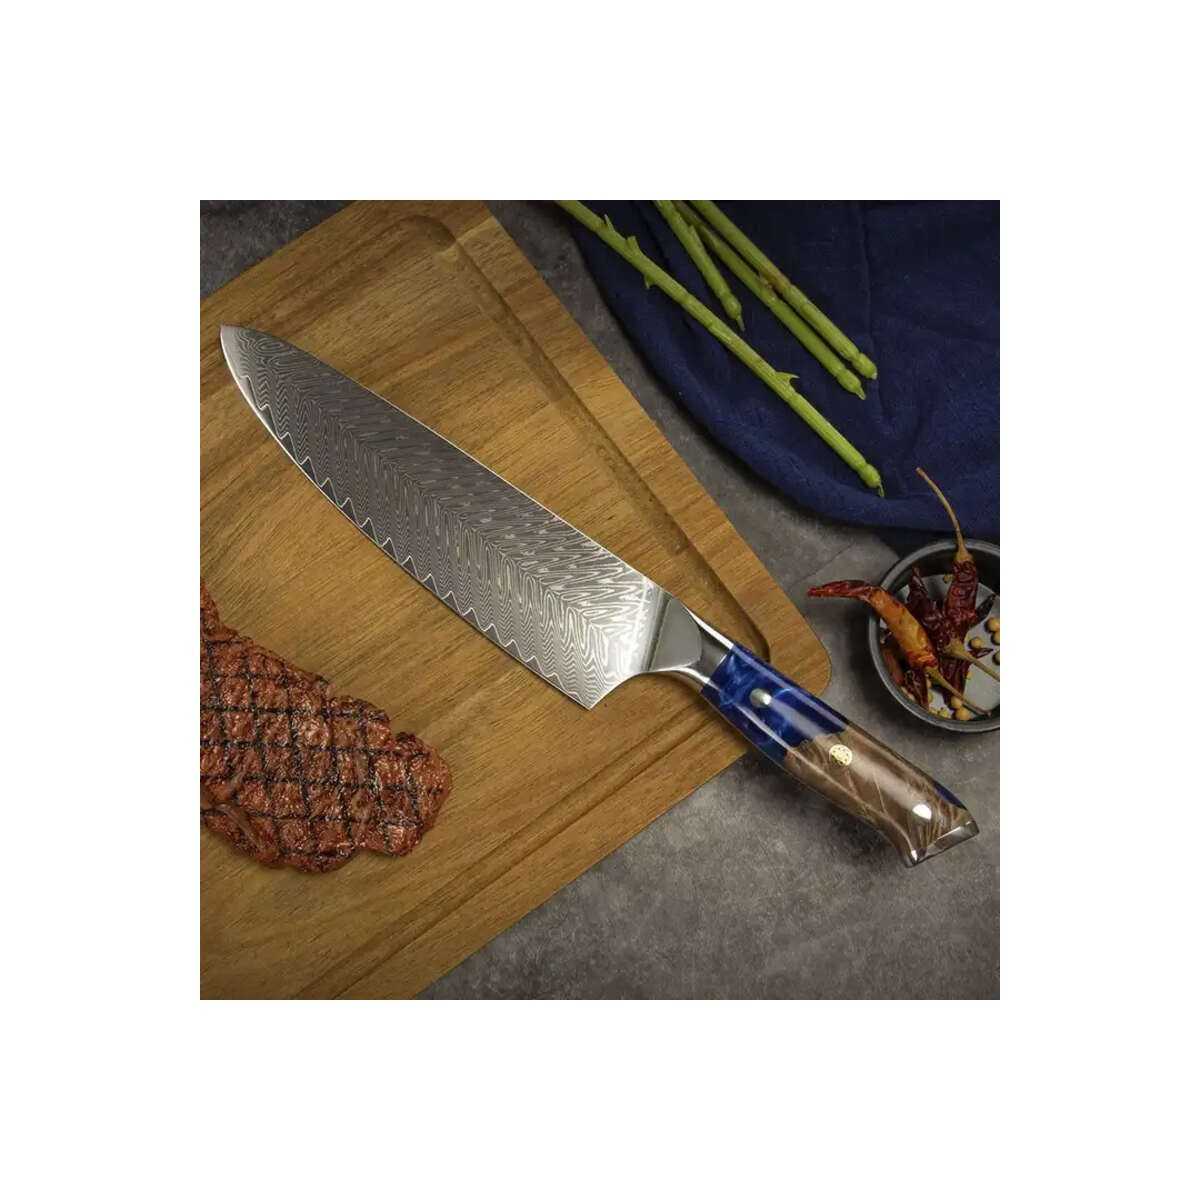 Mirage Chef Knife